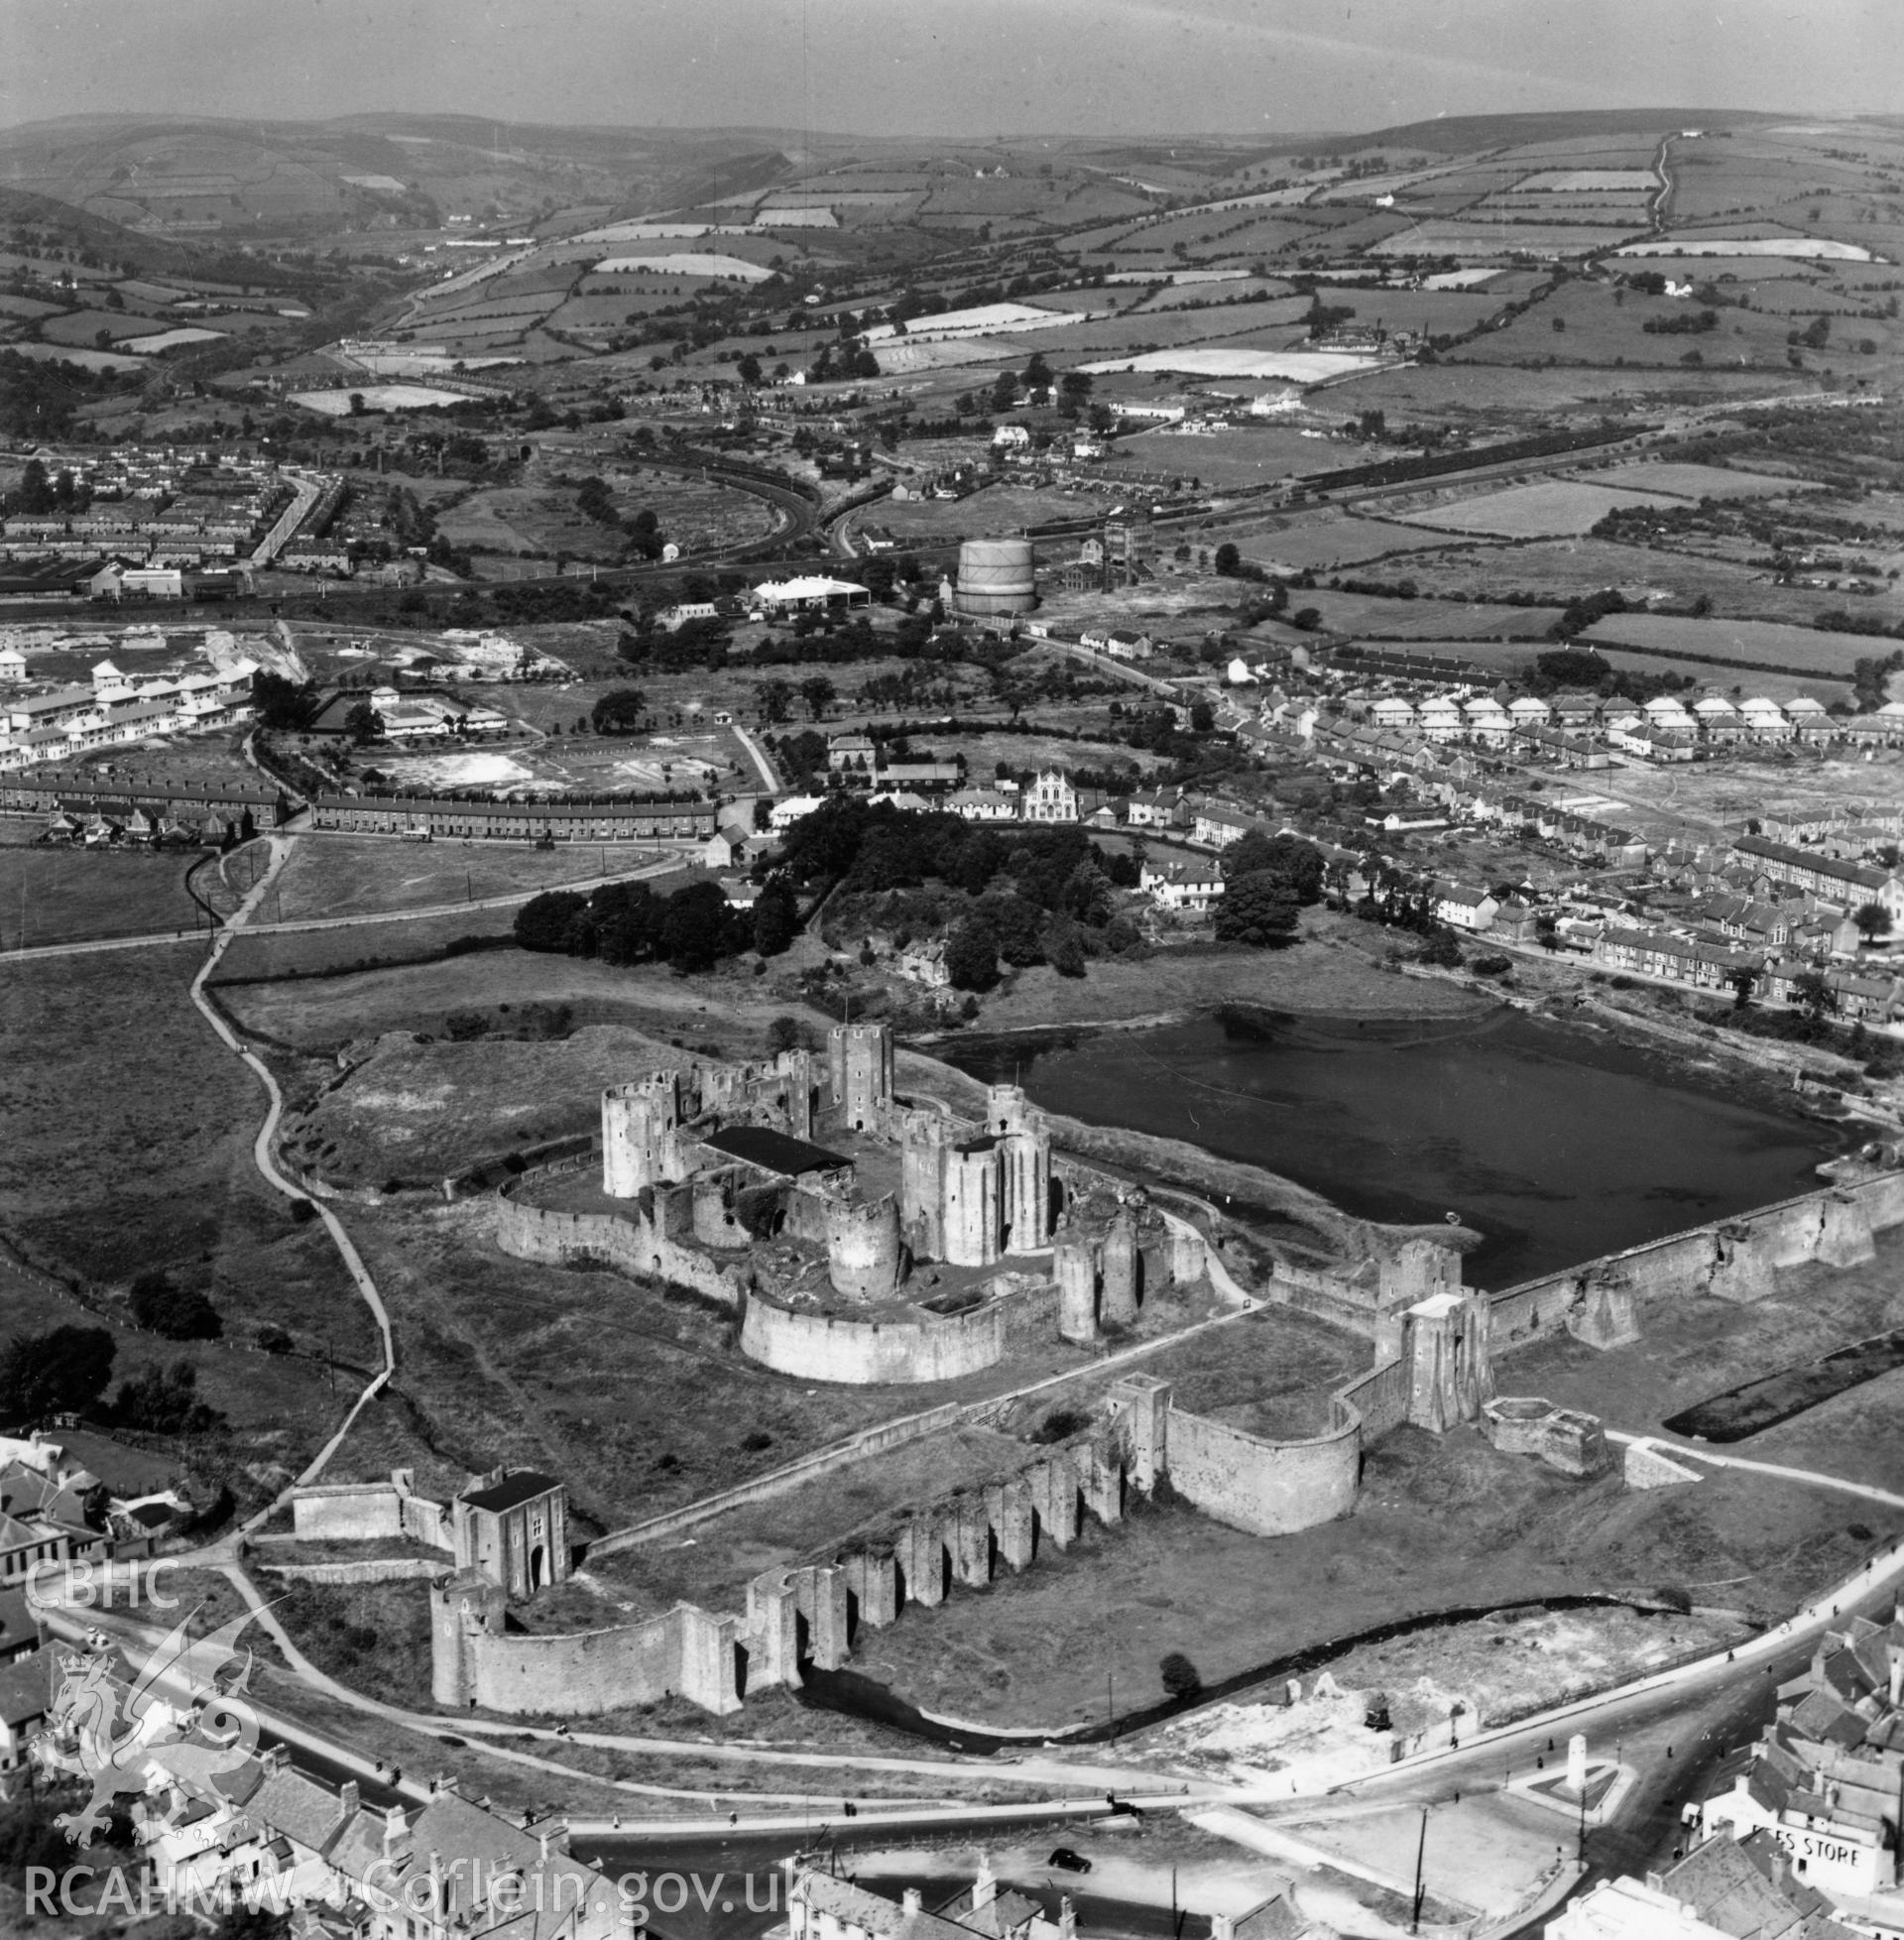 View of Caerphilly showing castle and housing estates. Oblique aerial photograph, 5?" cut roll film.